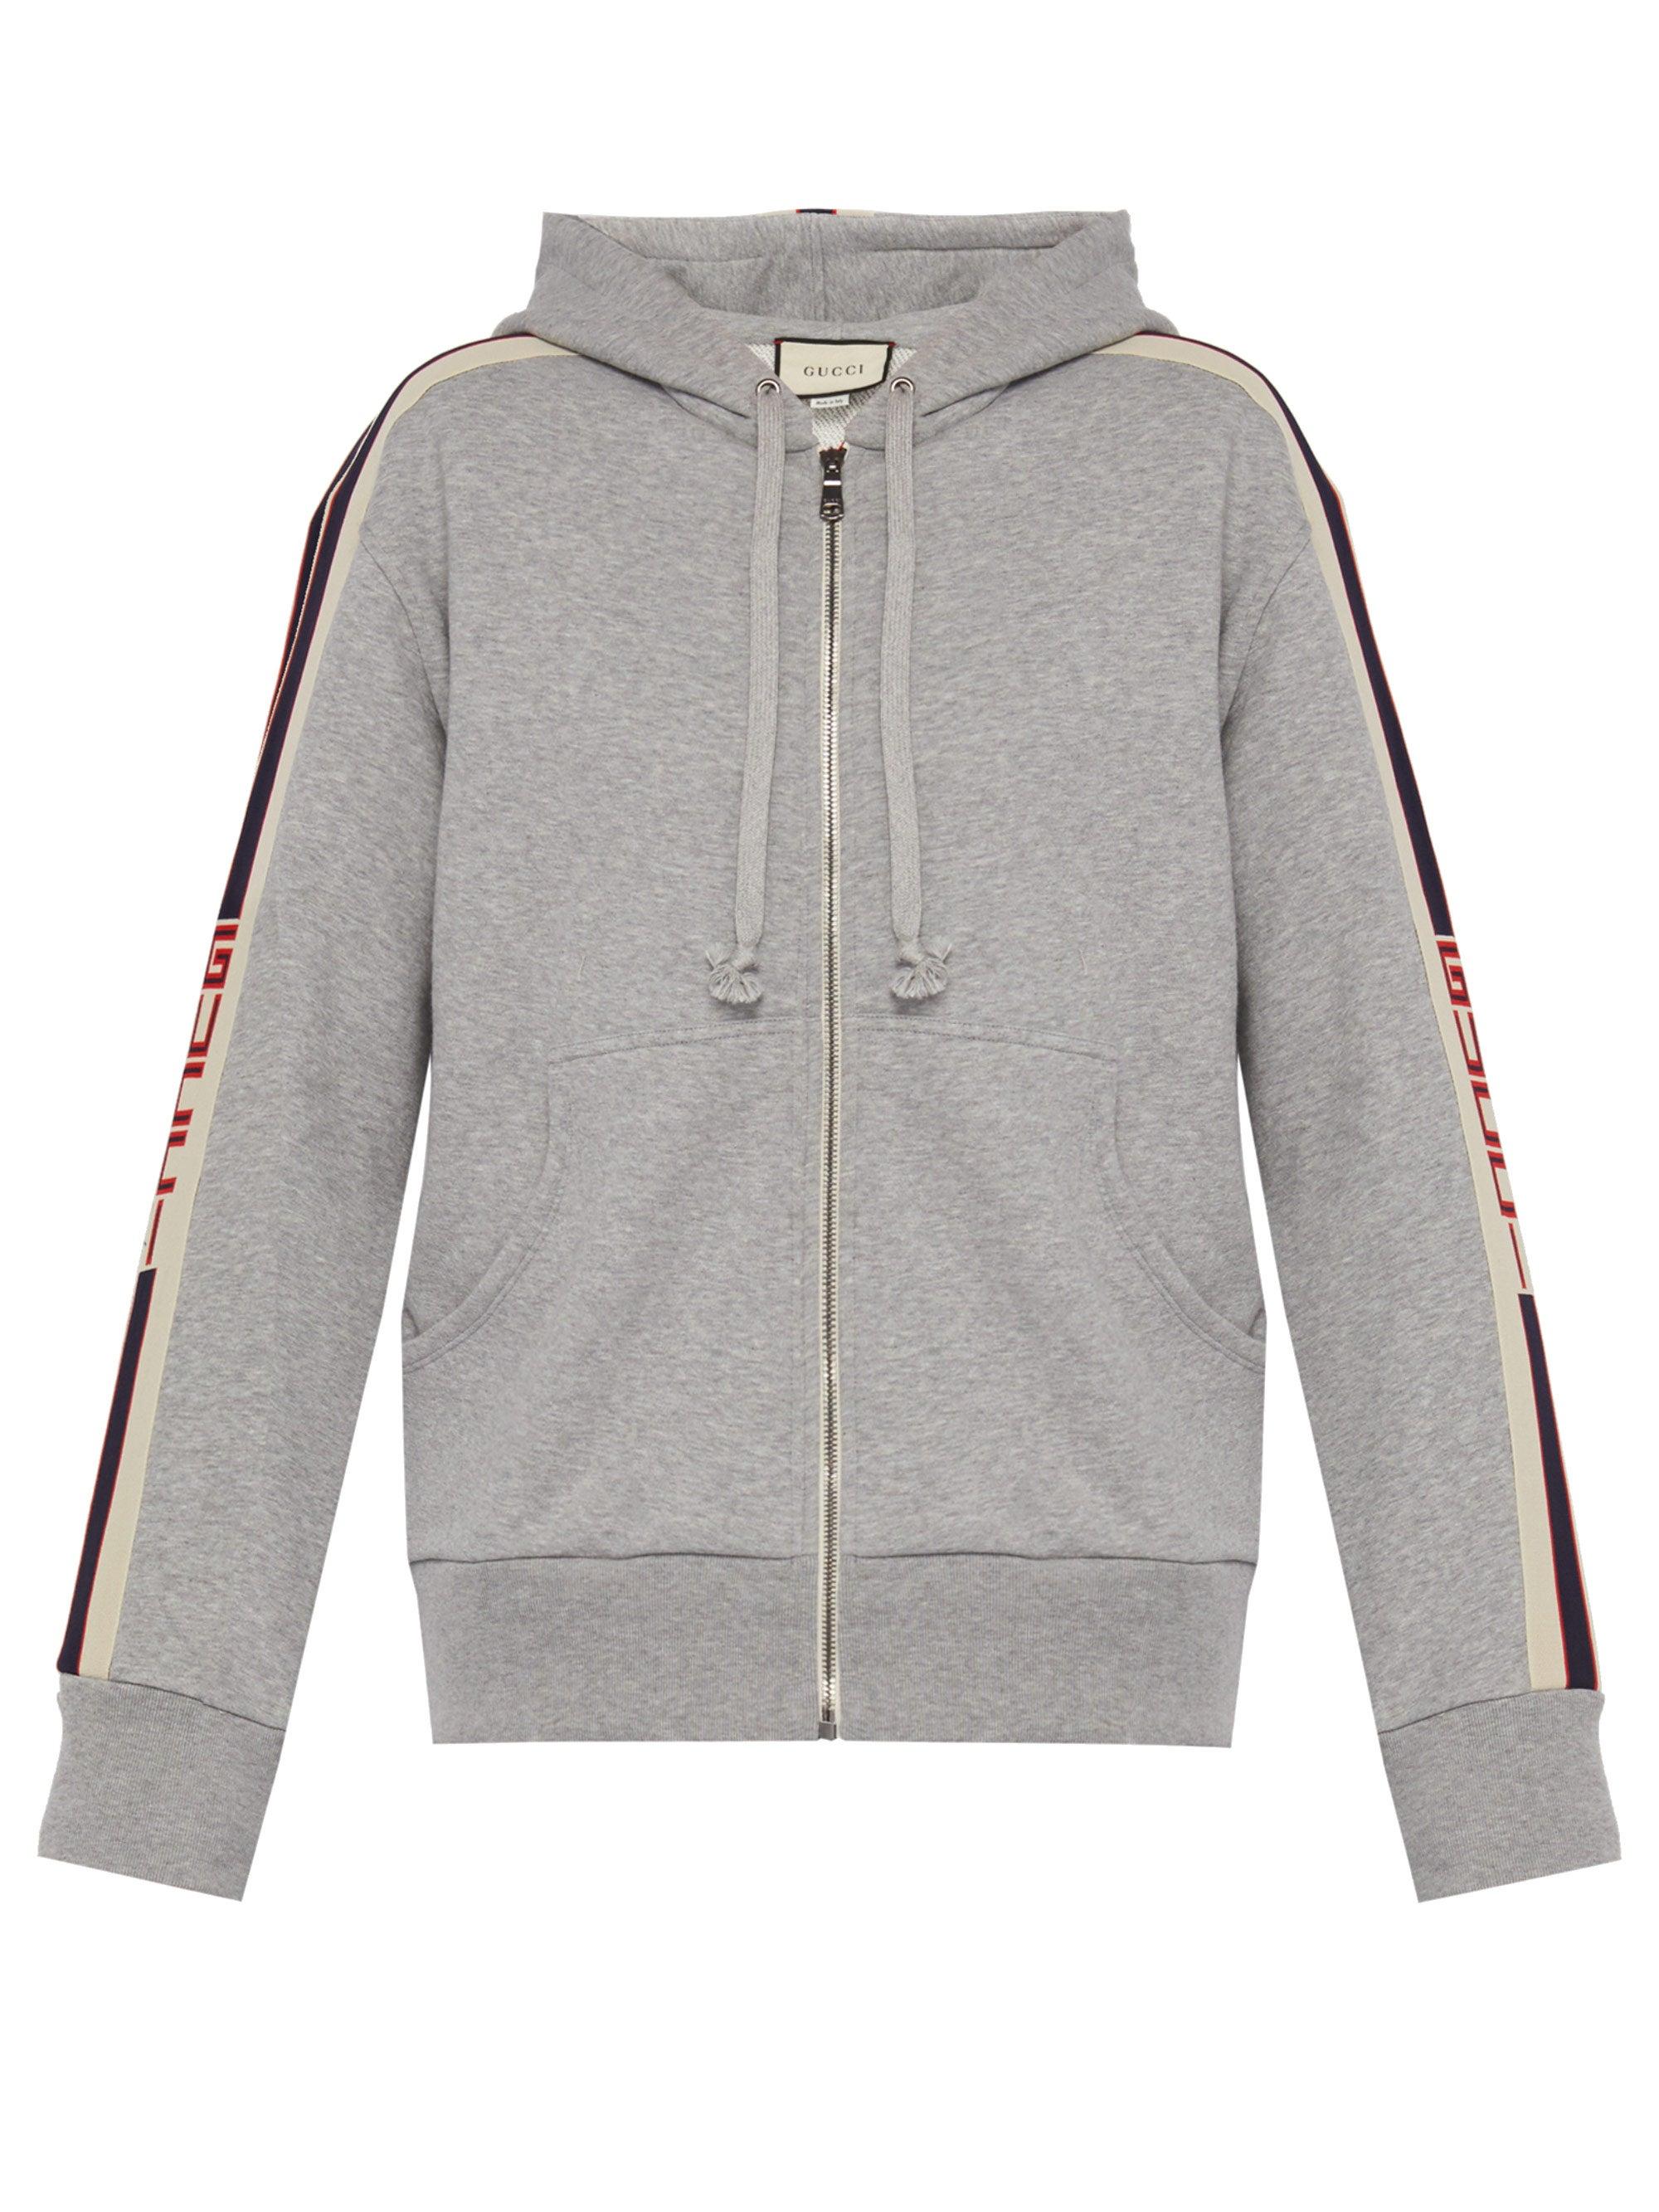 Gucci Cotton Tiger Tape Hoodie in Light Grey (Gray) for Men | Lyst